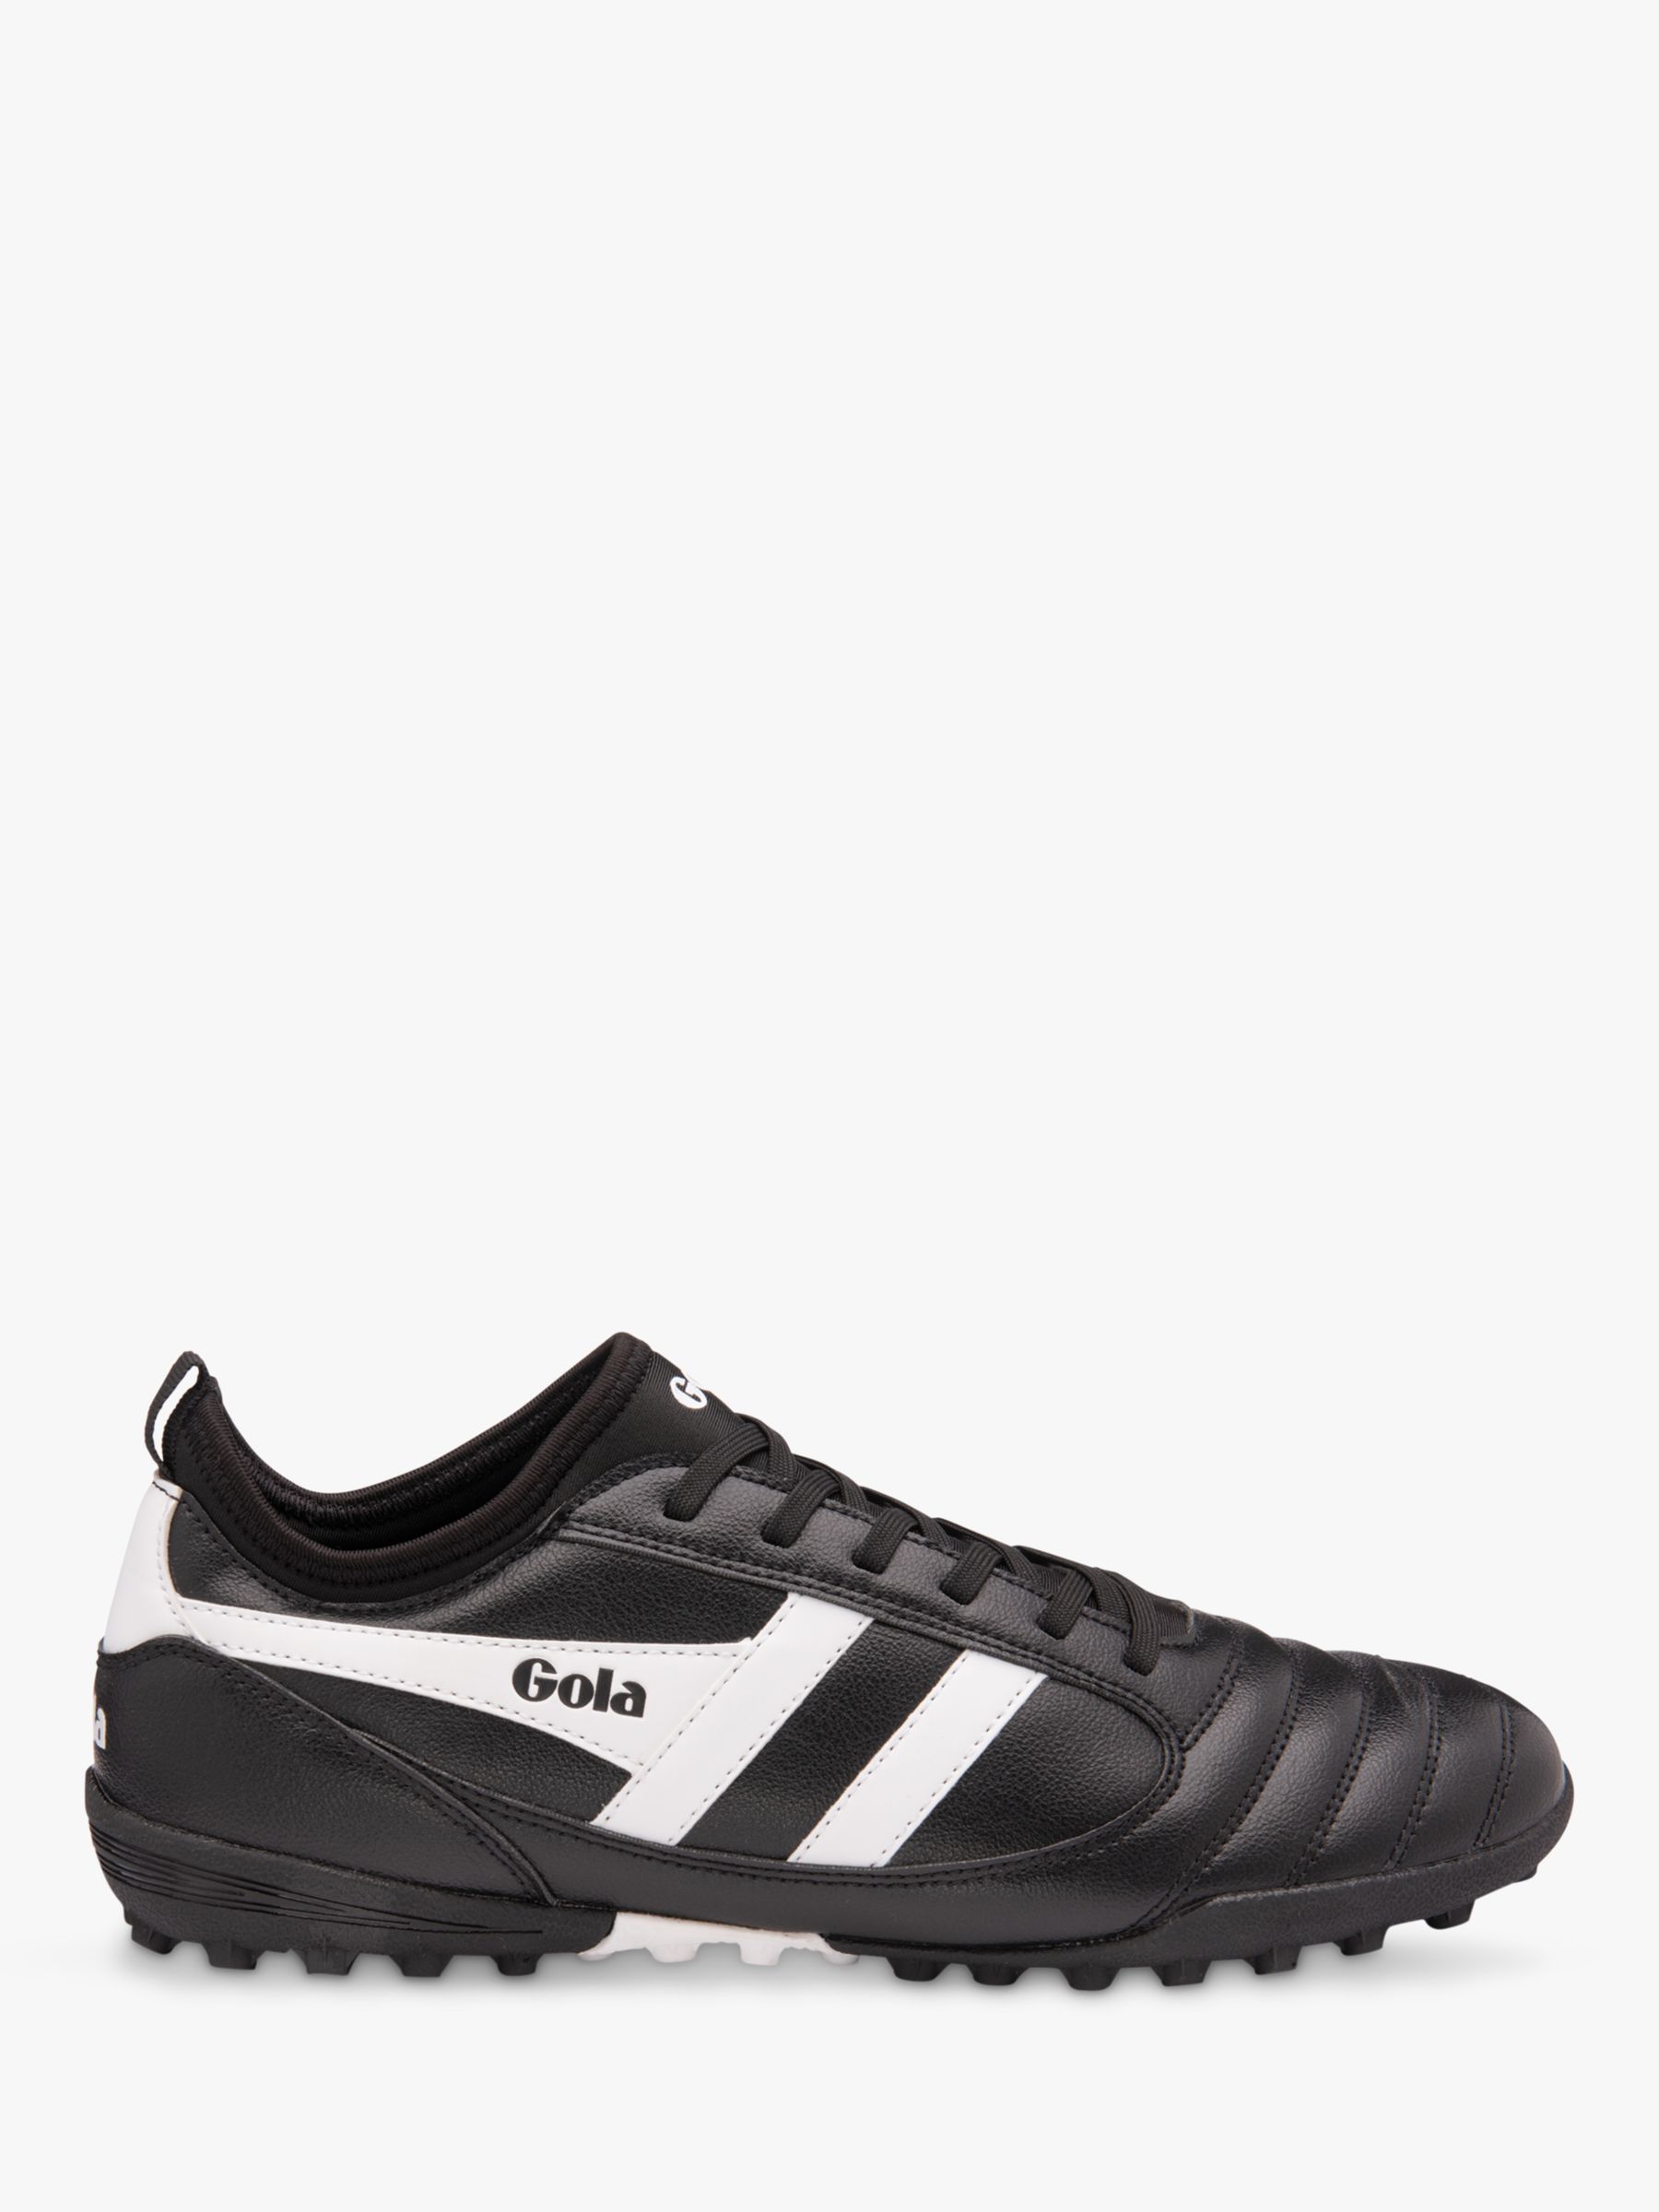 Buy Gola Performance Ceptor Turf Football Trainers, Black/White Online at johnlewis.com